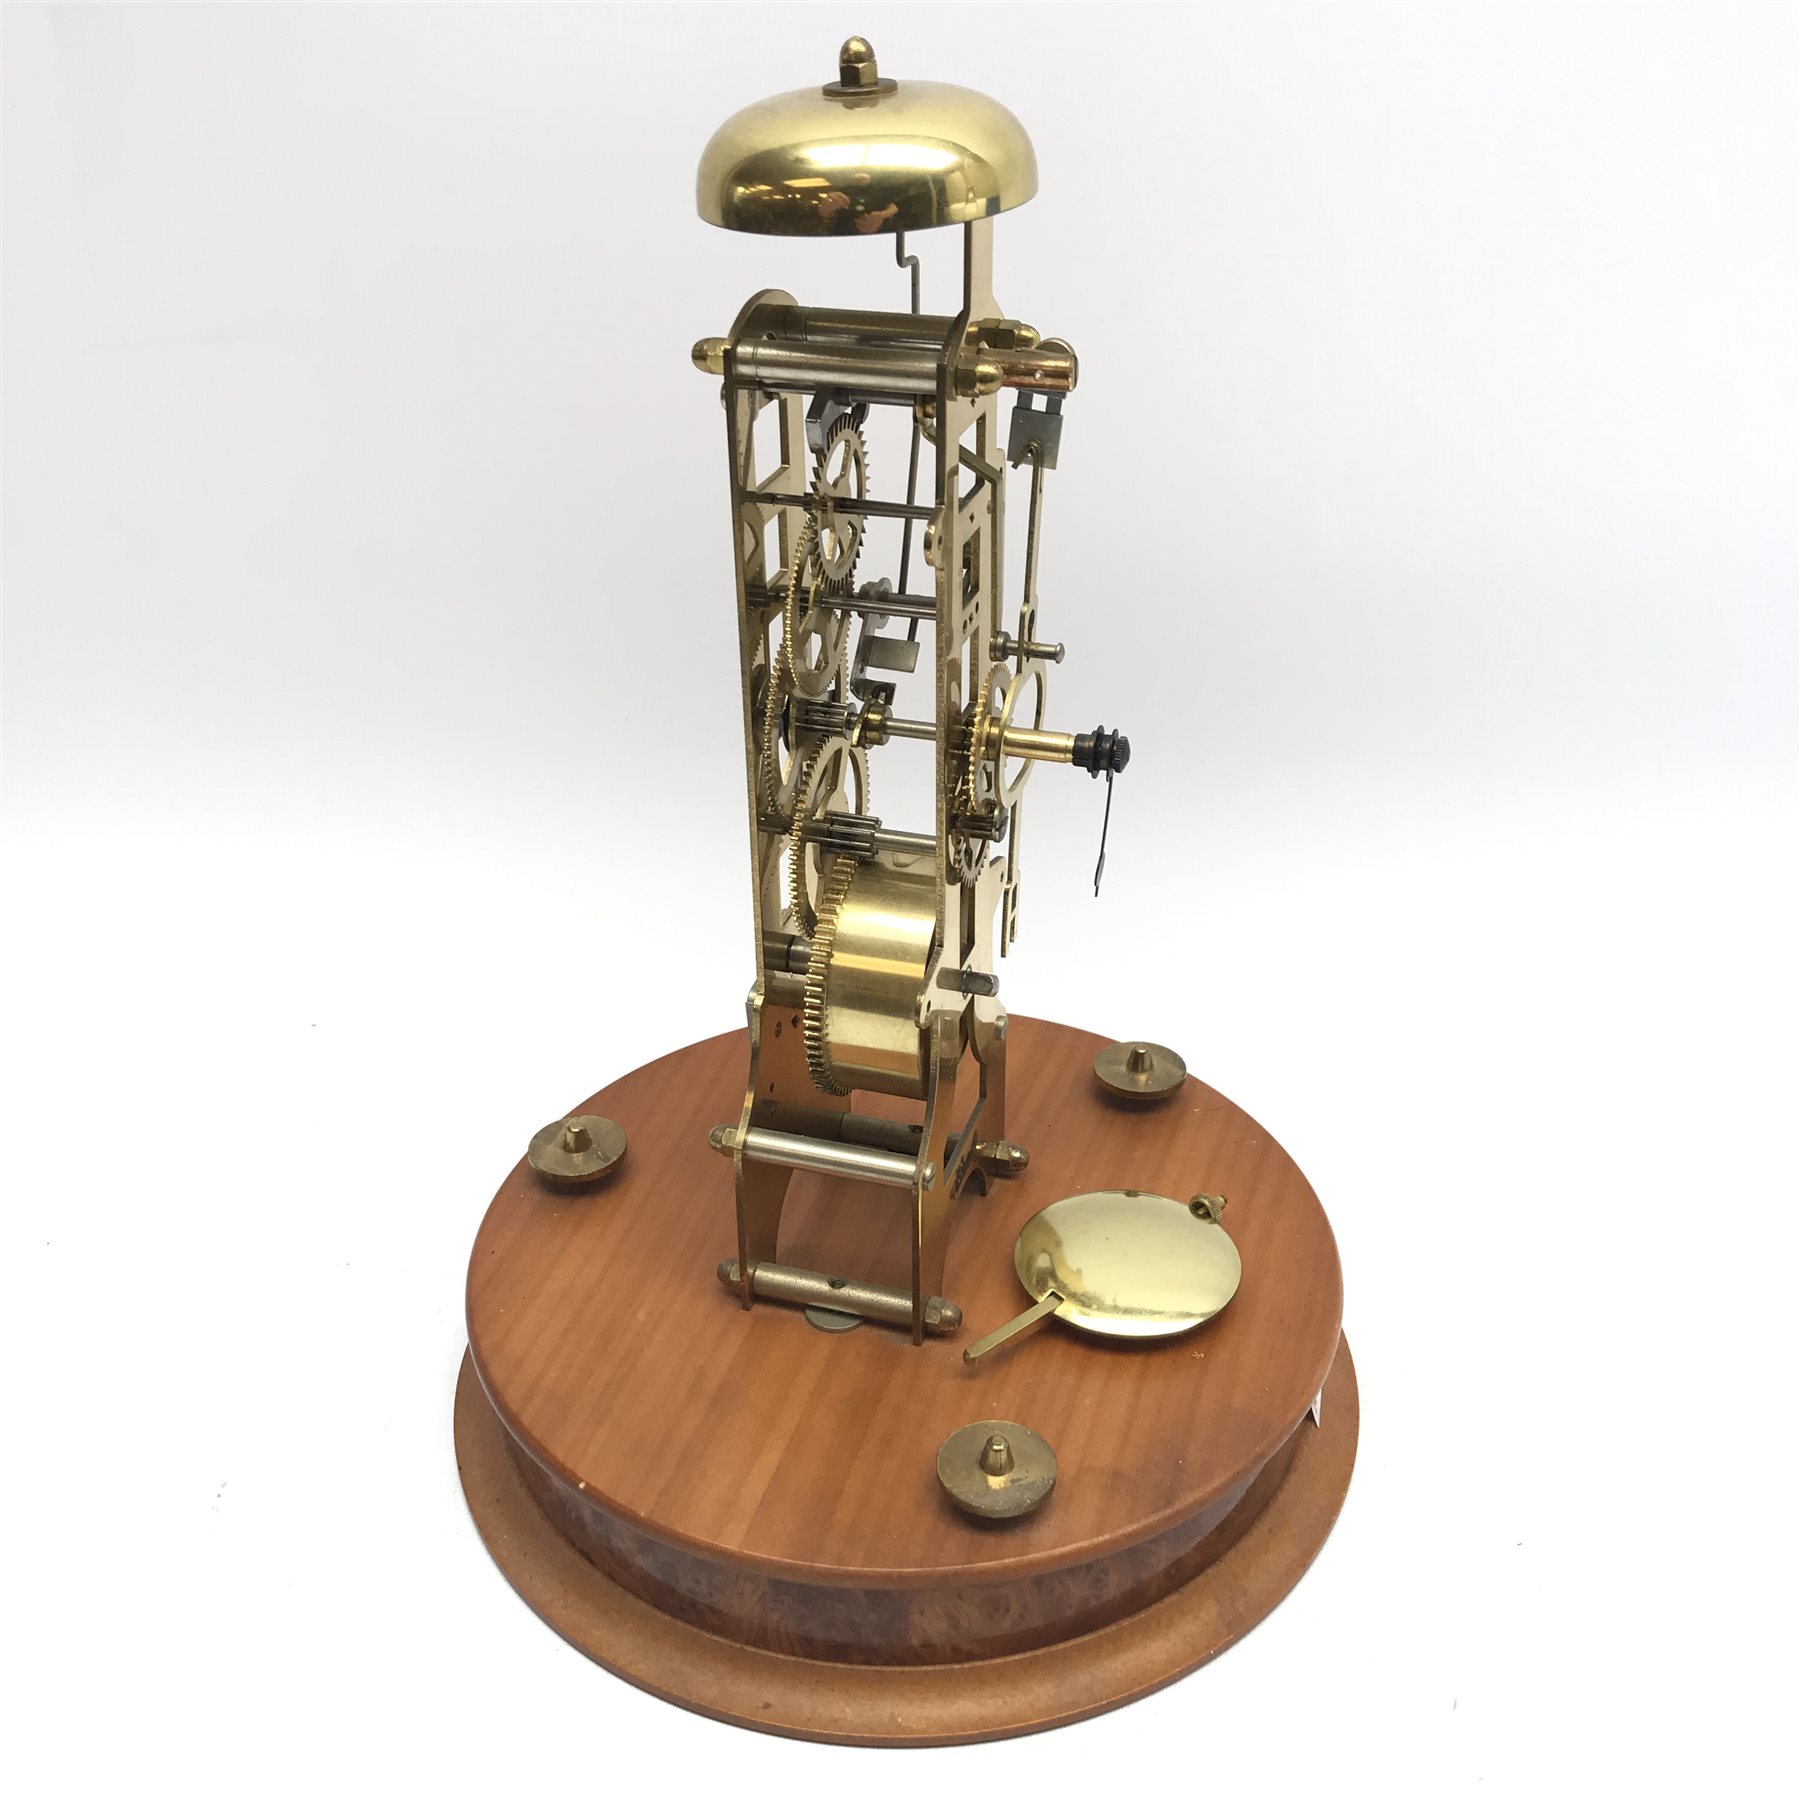 Hermle brass skeleton clock, single train driven movement, on circular fruitwood base with figured f - Image 4 of 4